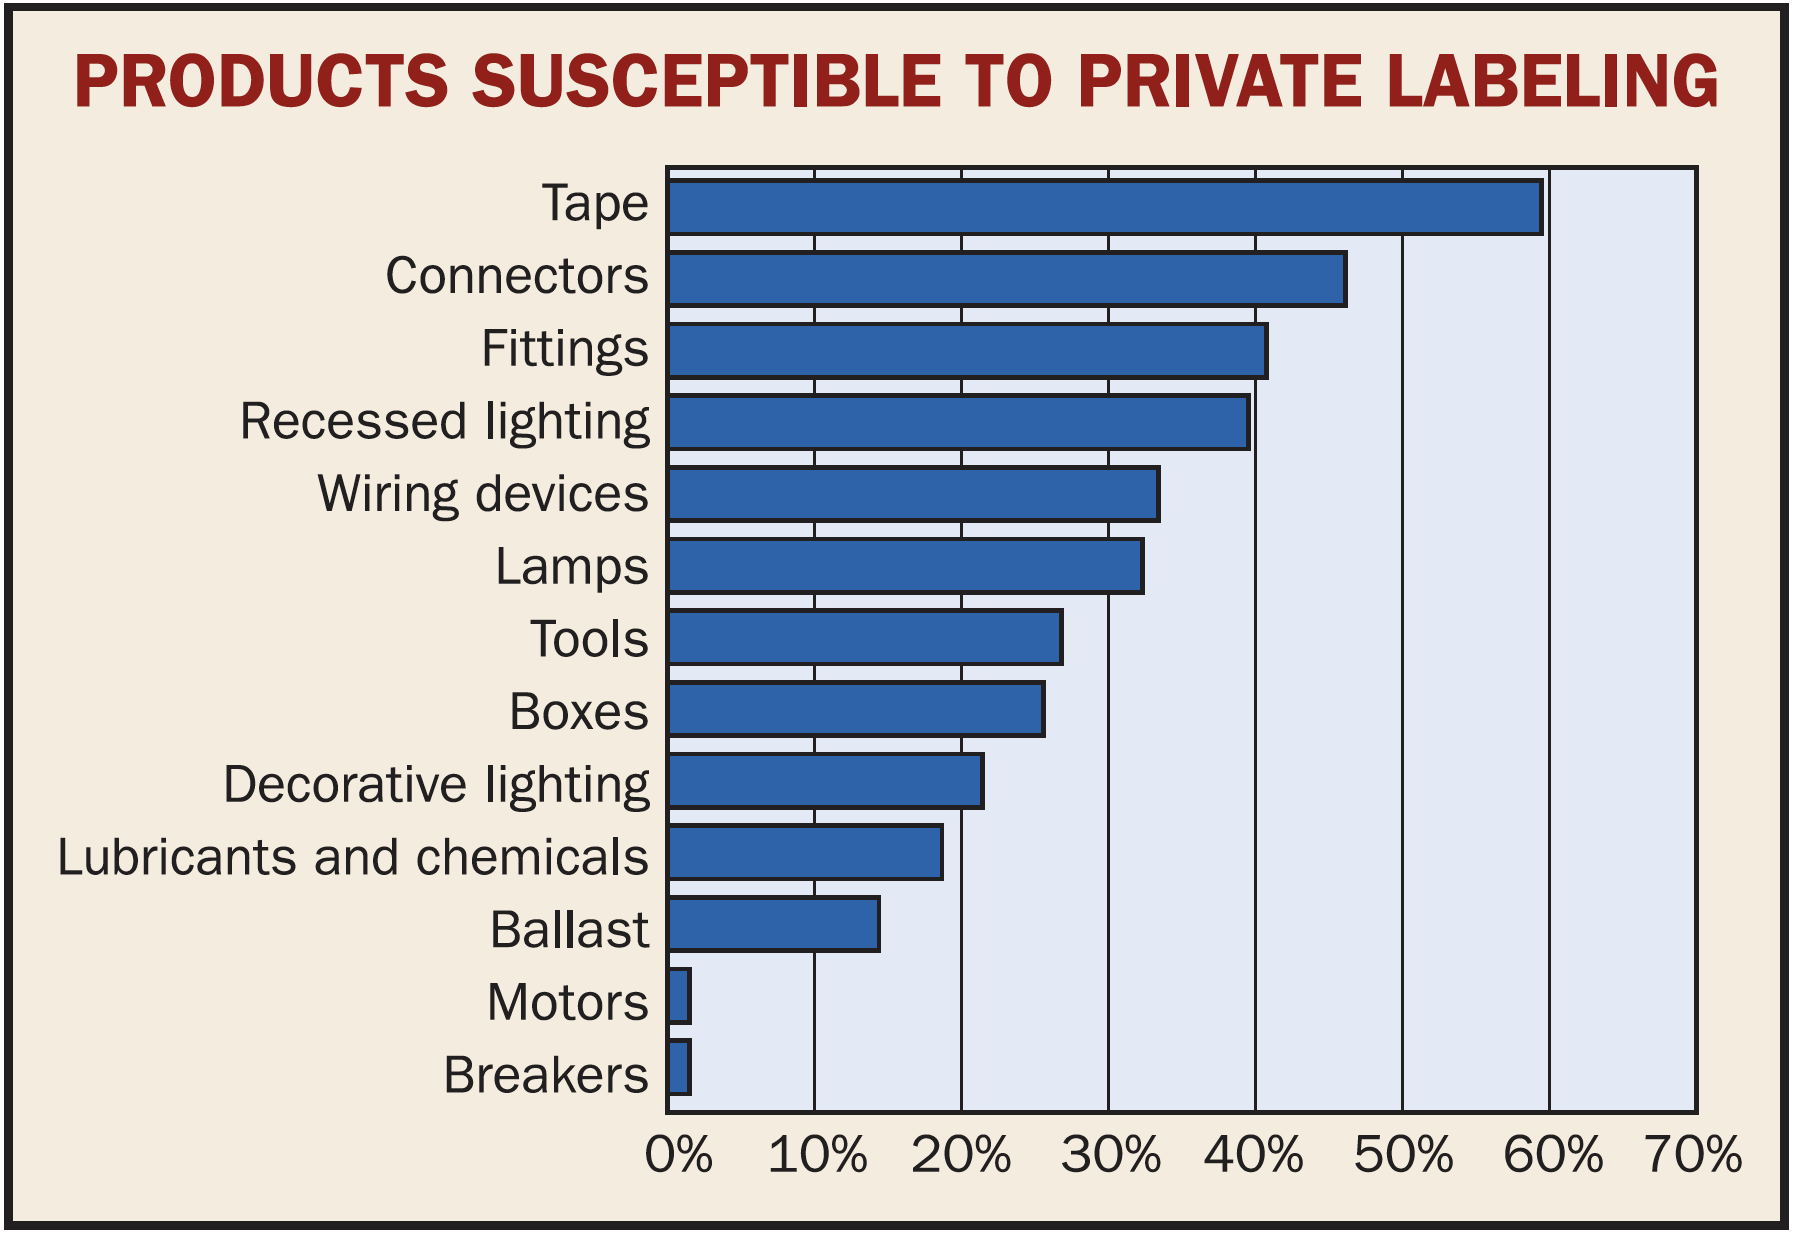 Products Susceptible to Private Labeling